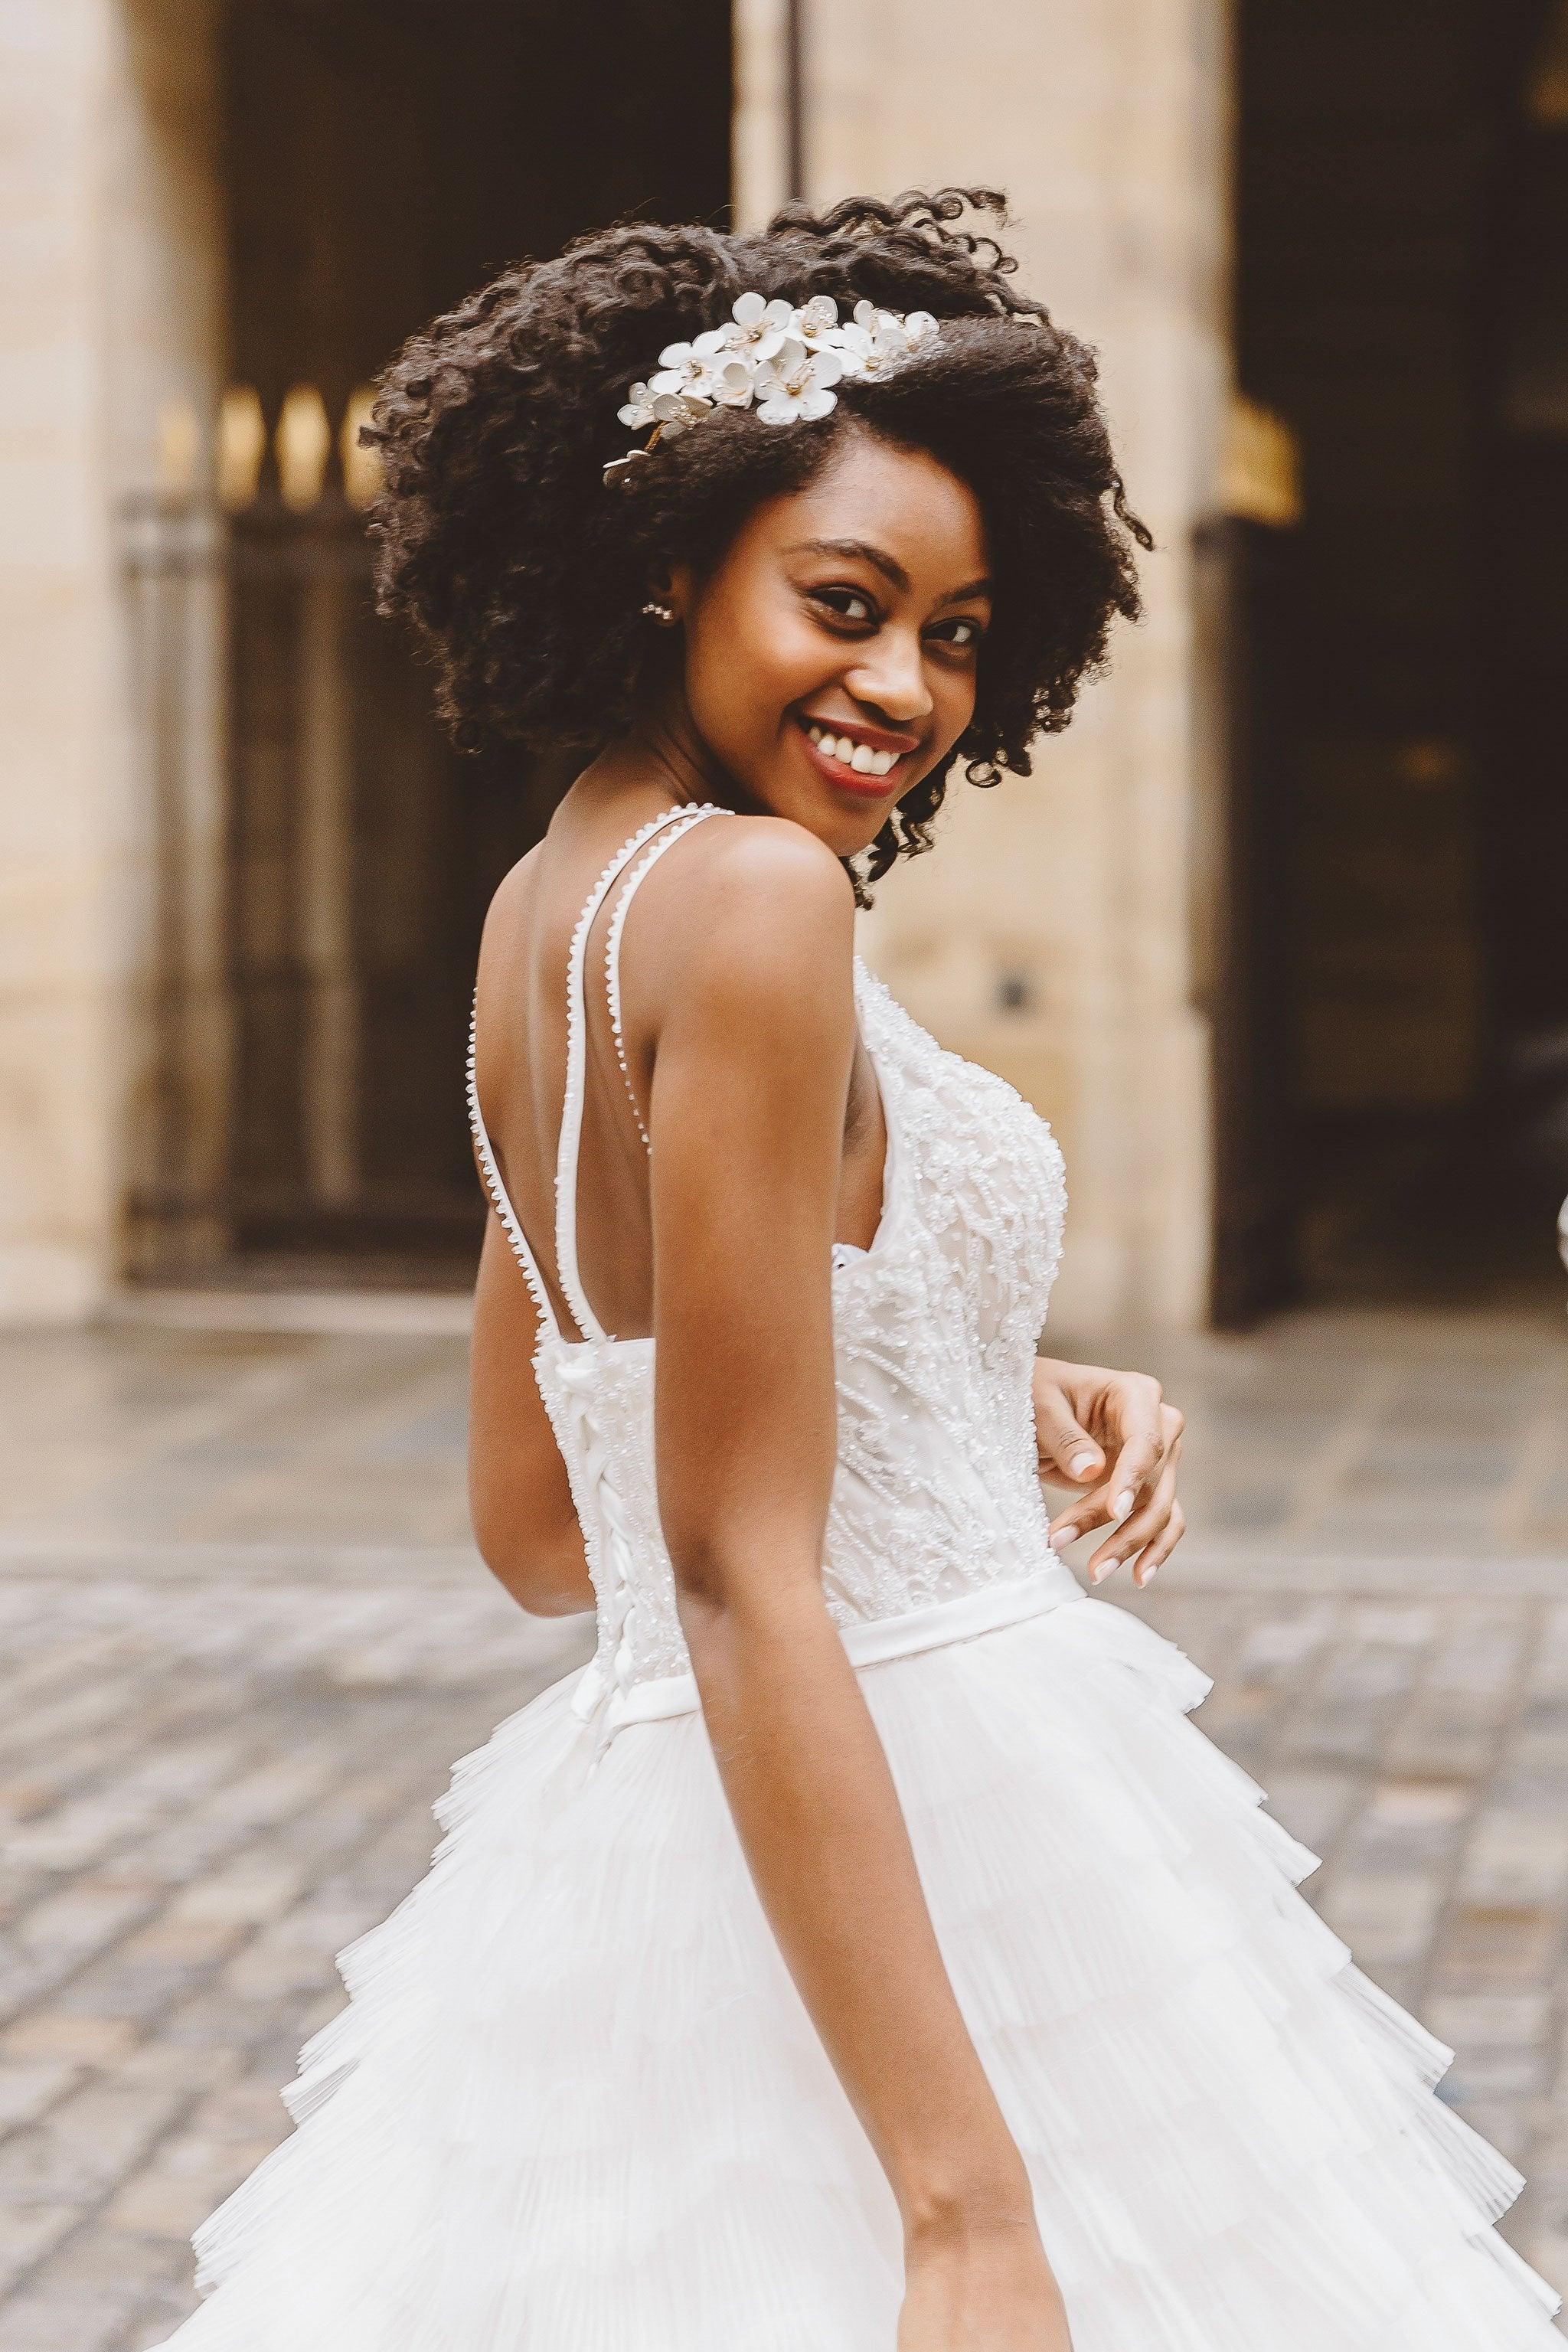 Tulle Skirt Wedding Dress | Tulle Wedding Dress | Dare and Dazzle